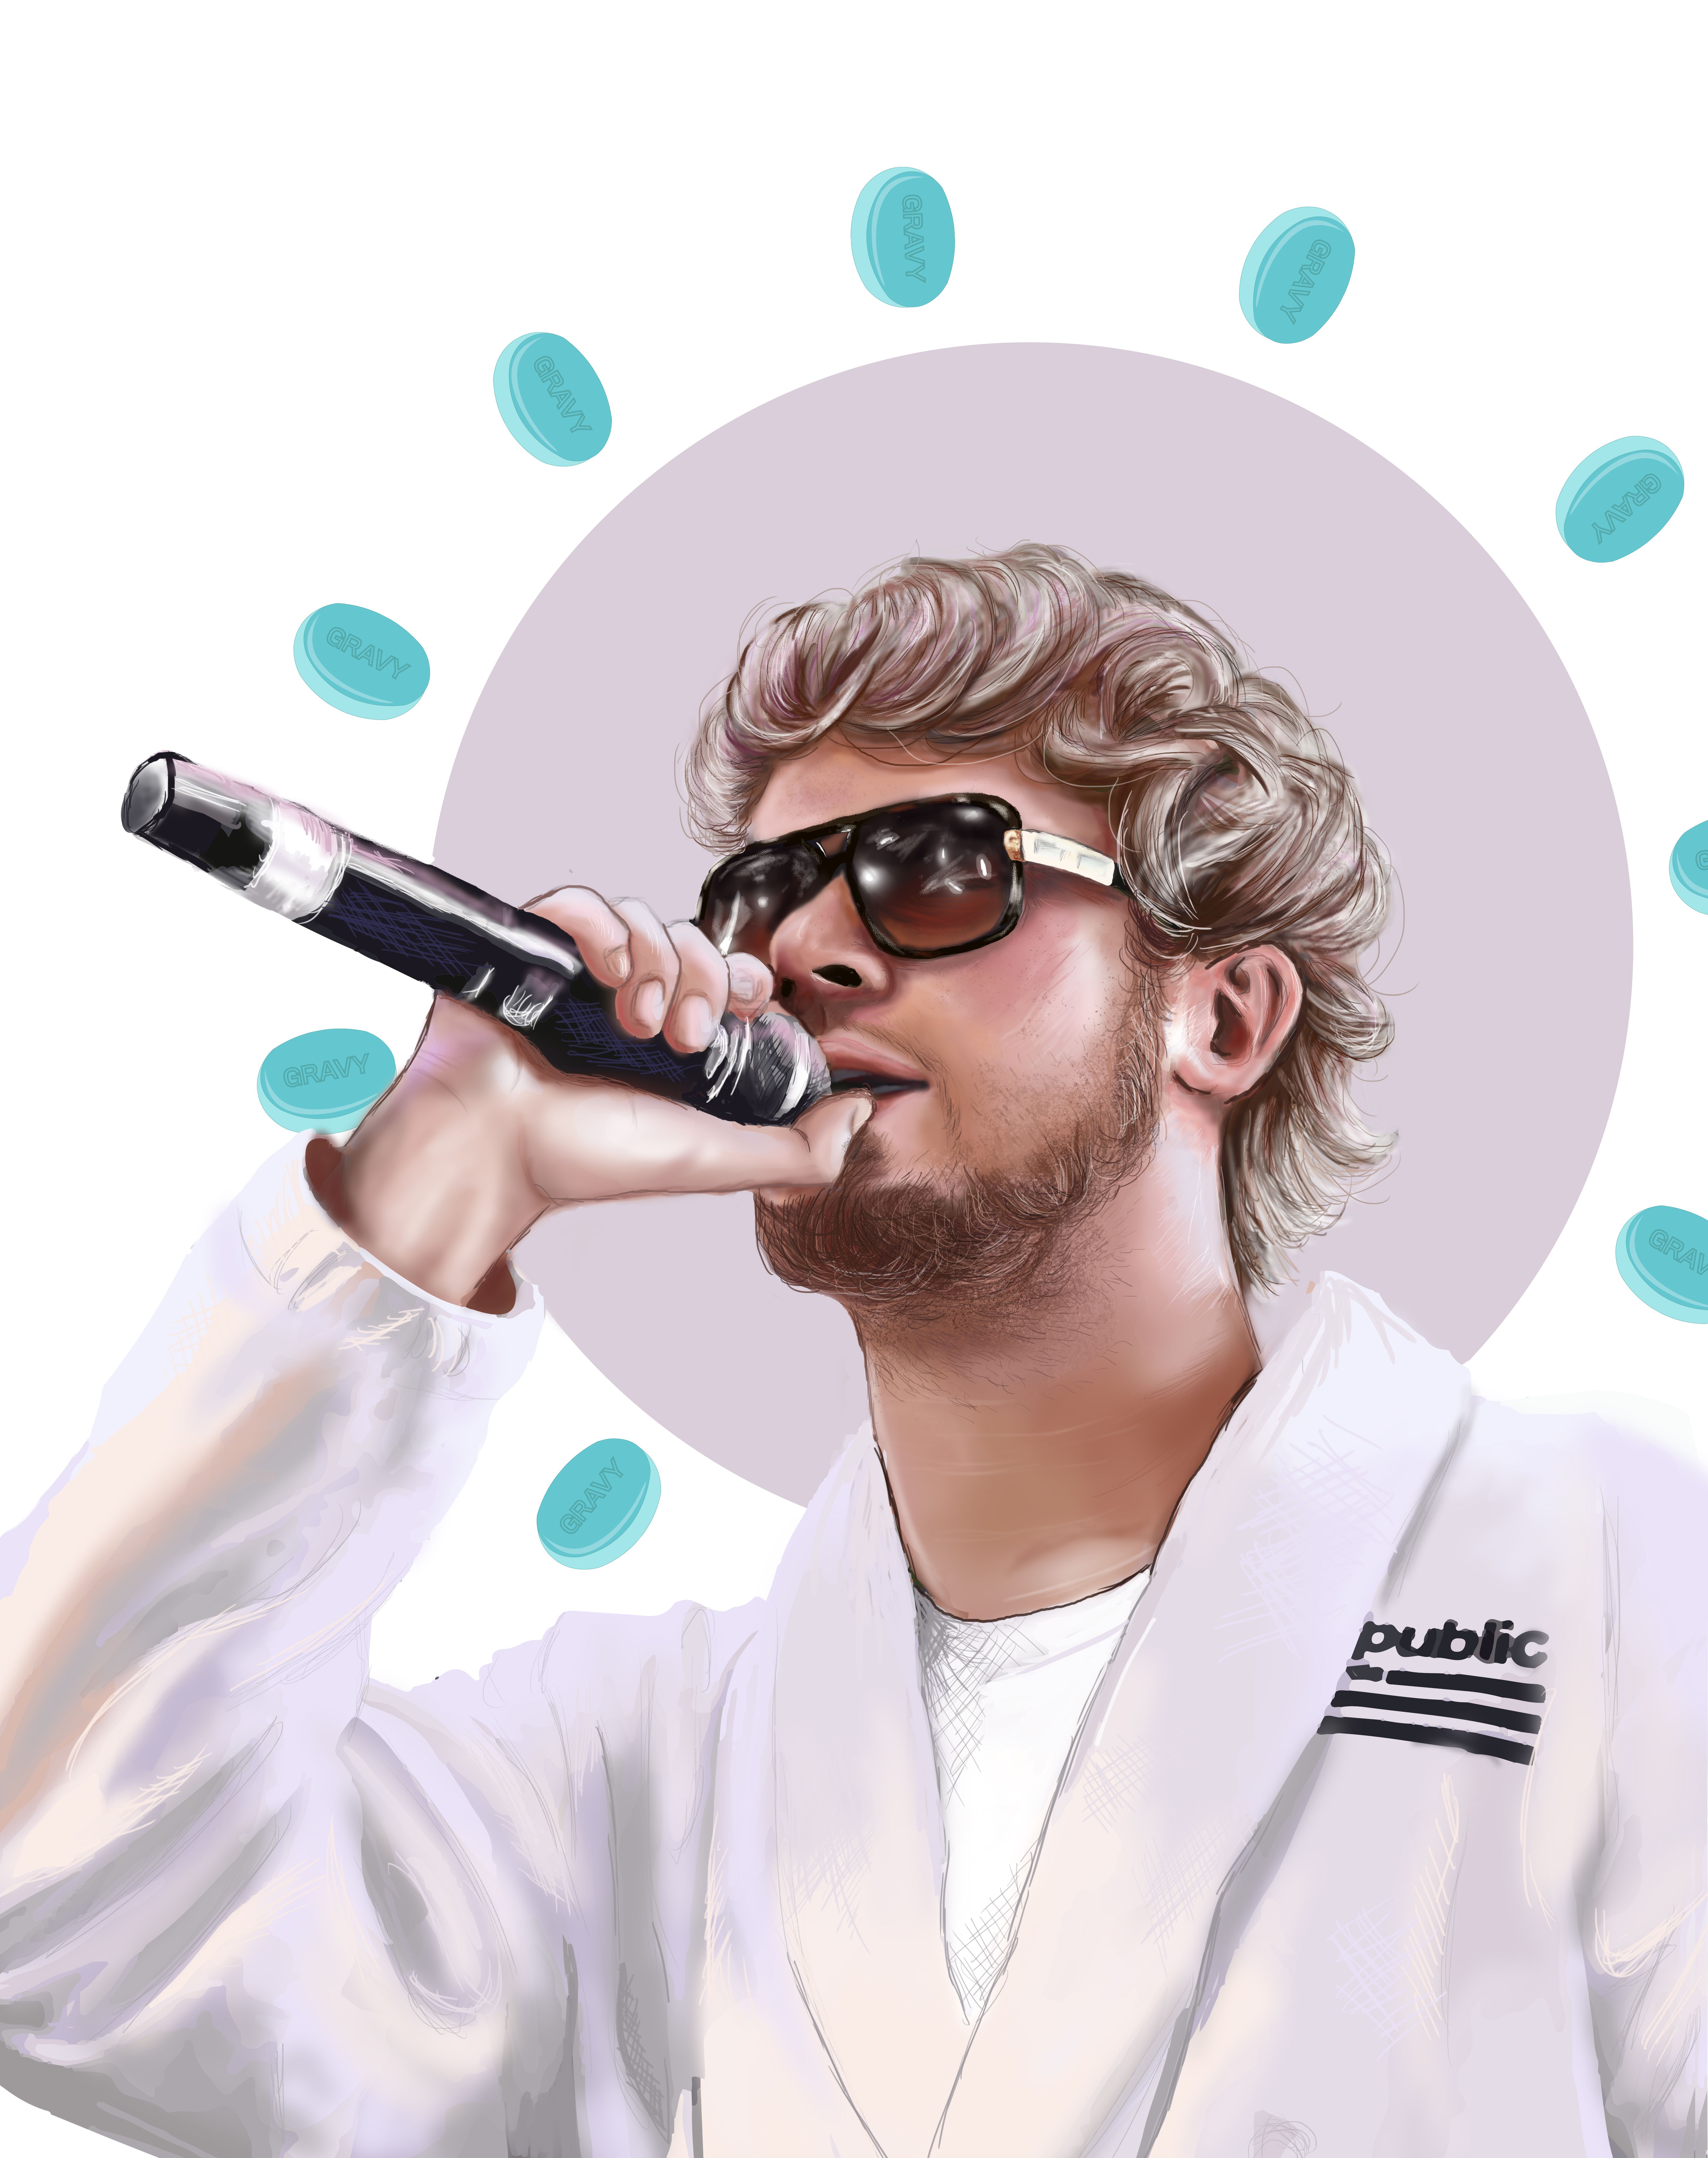 Yung Gravy Wallpapers